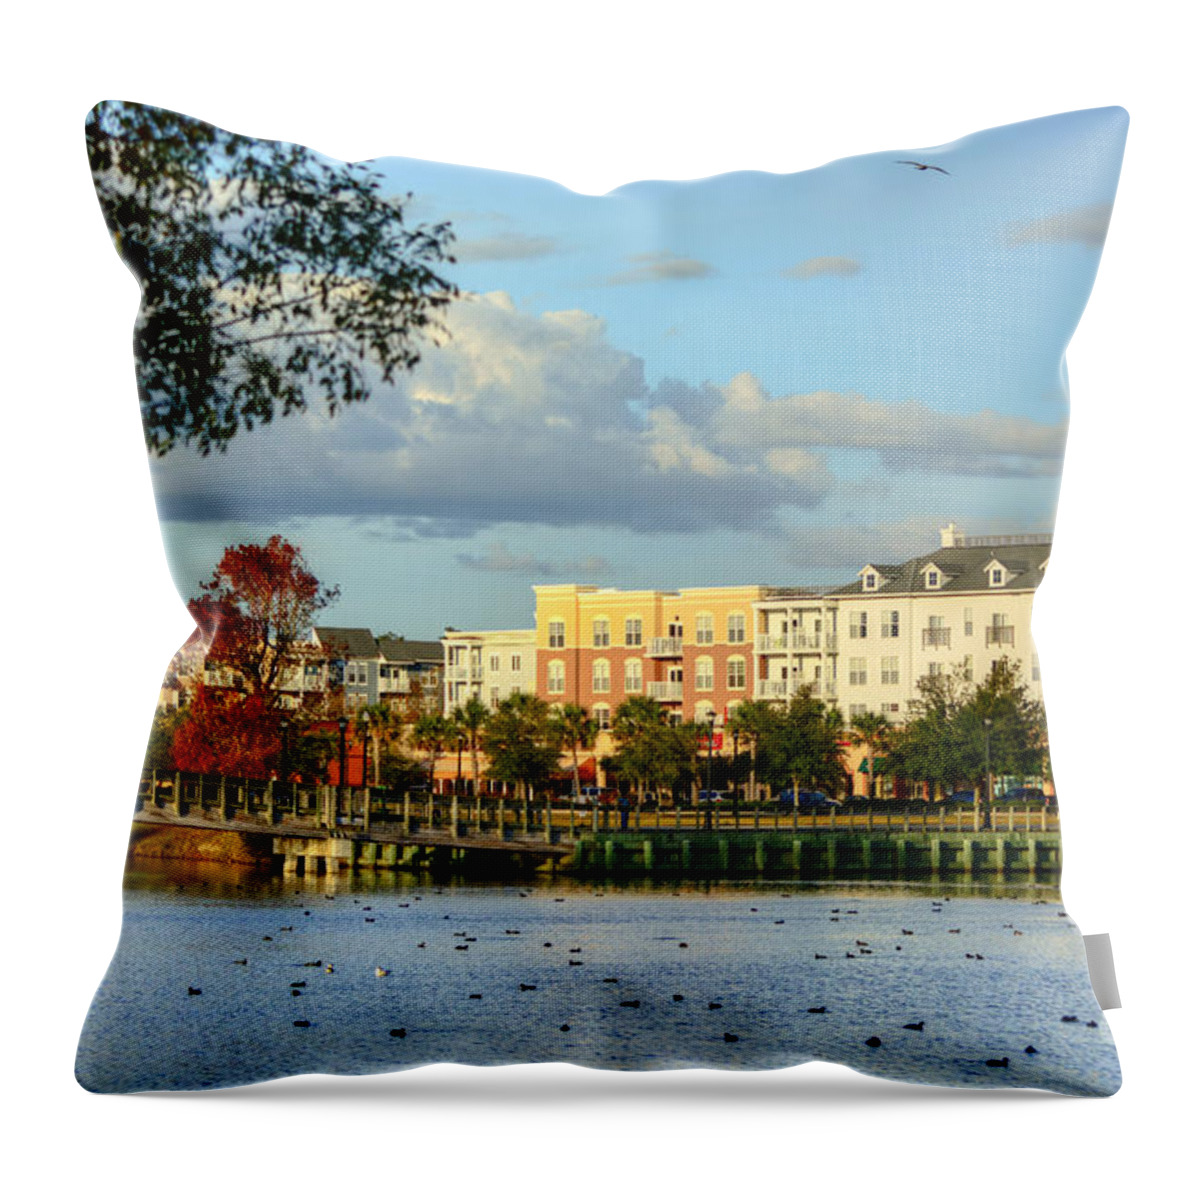 Scenic Throw Pillow featuring the photograph Market Common Myrtle Beach by Kathy Baccari